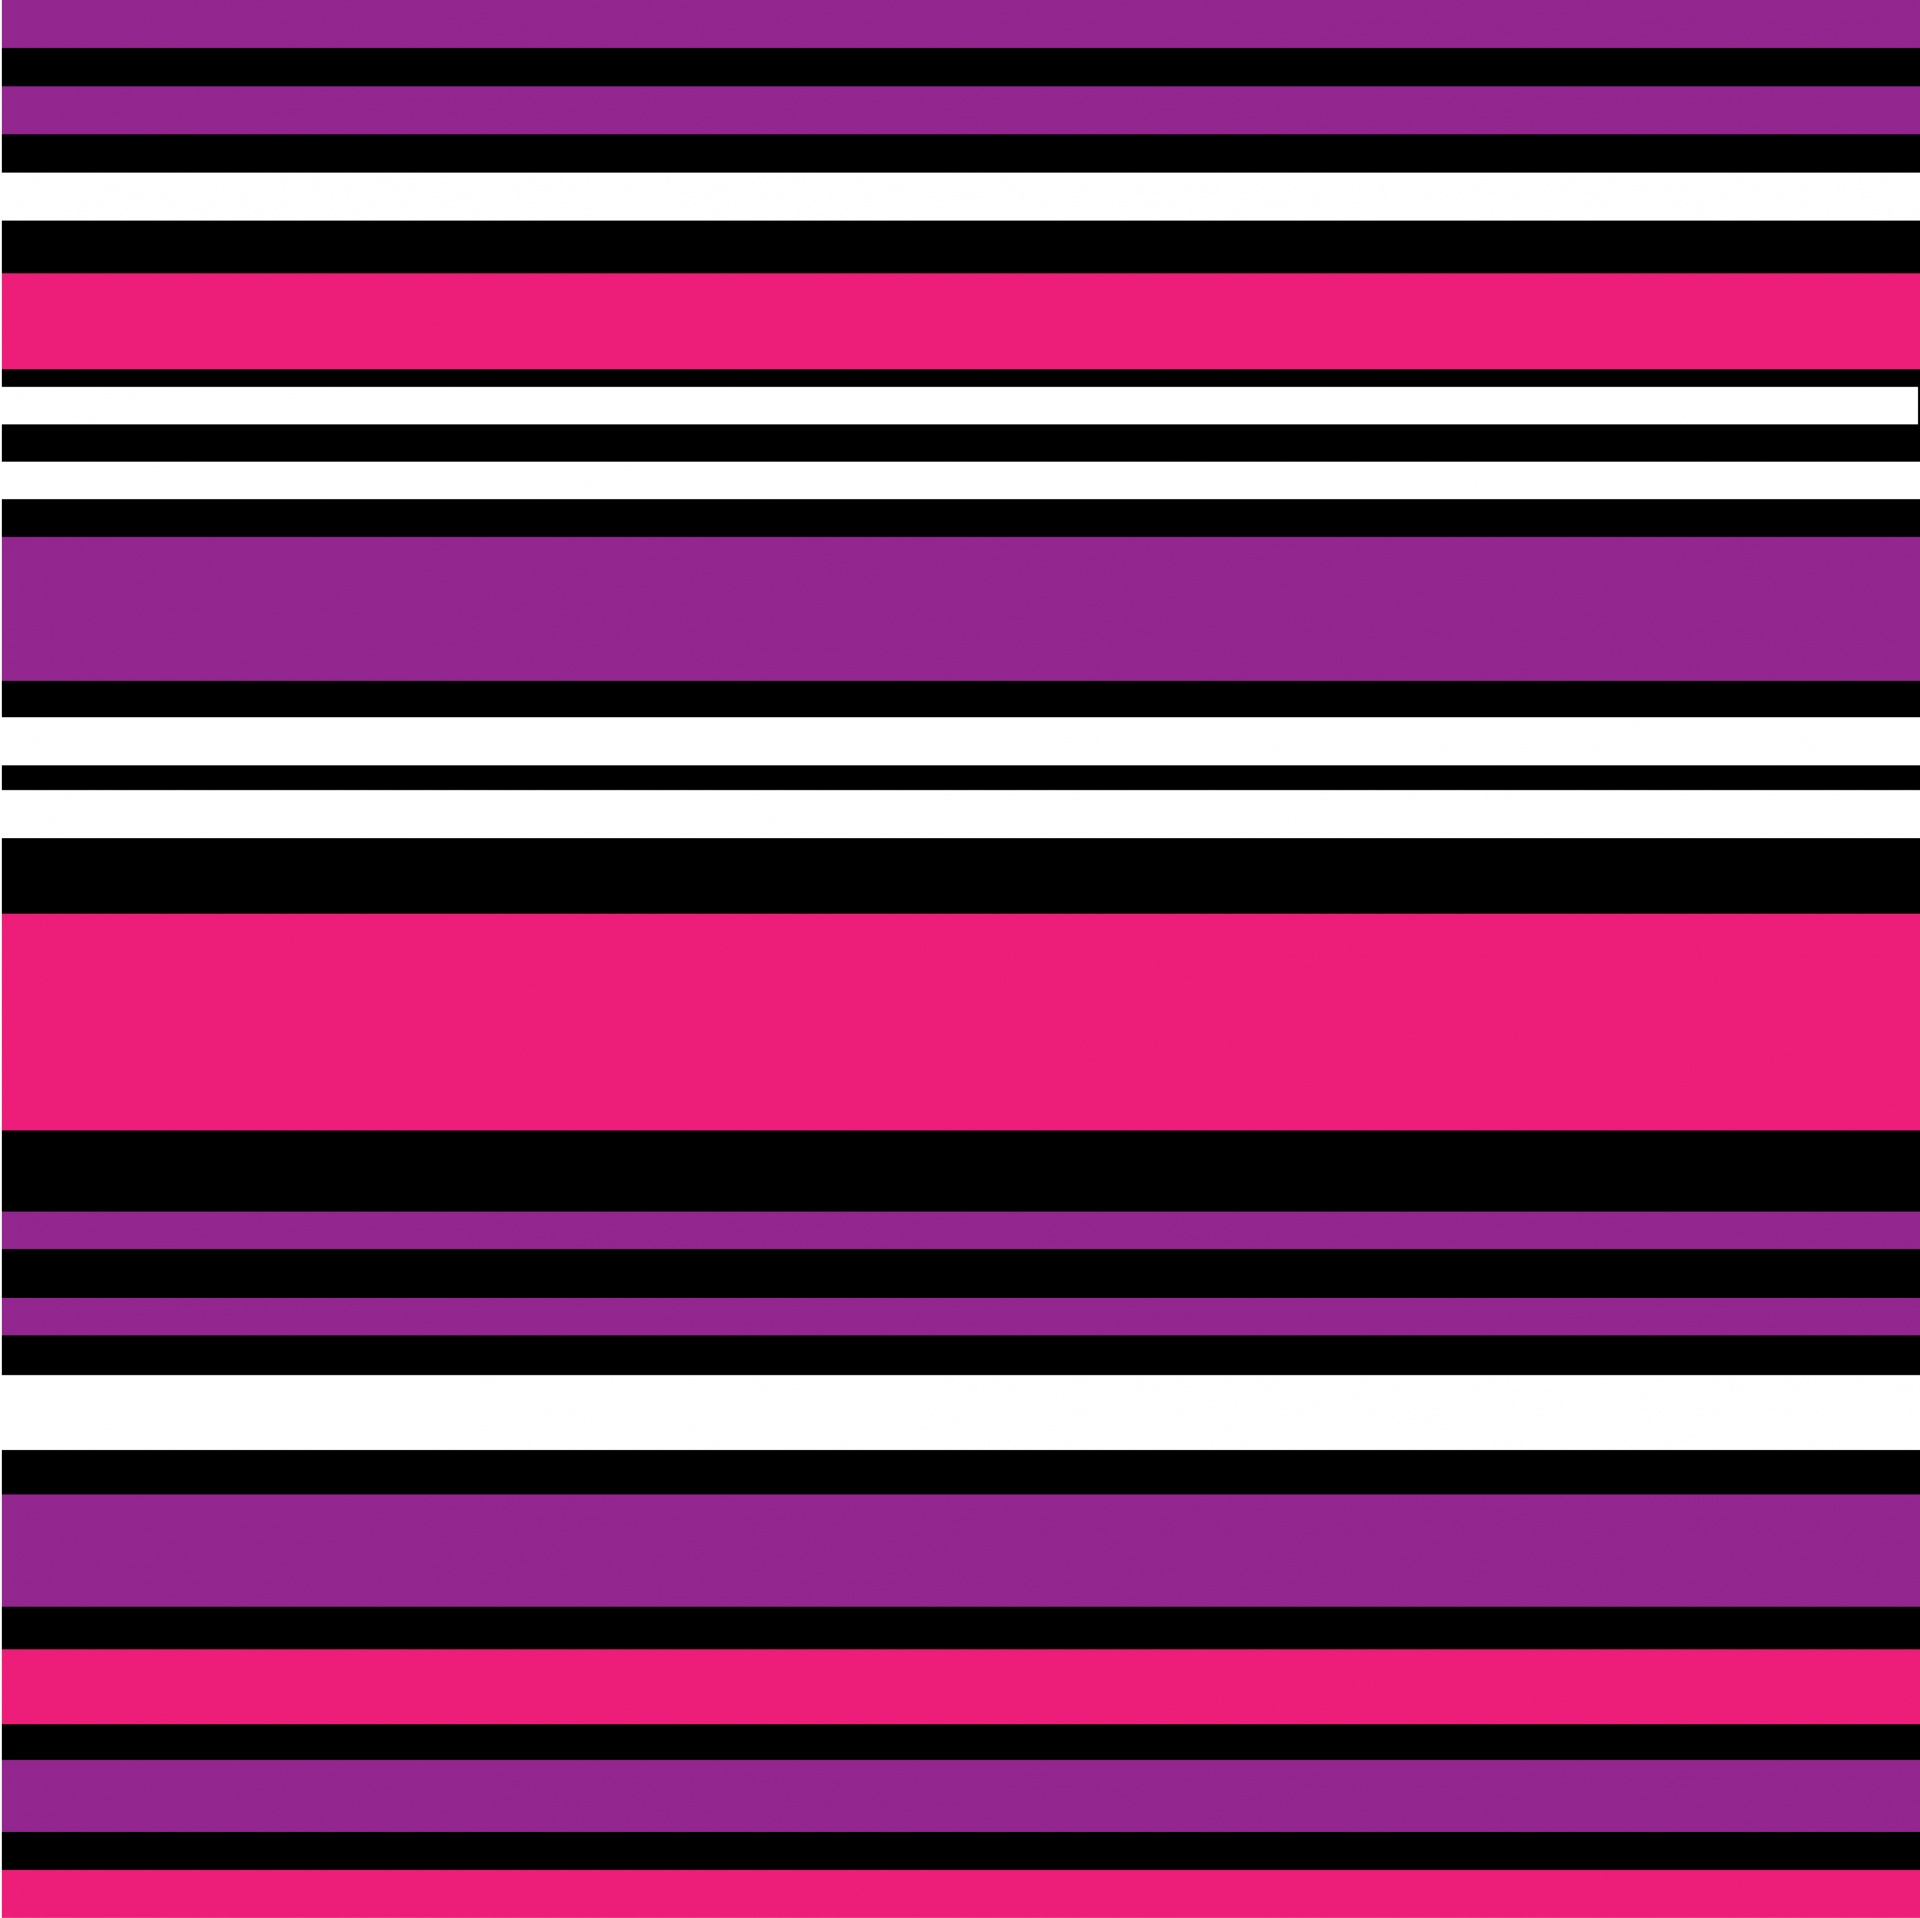 Stripes Colorful Background